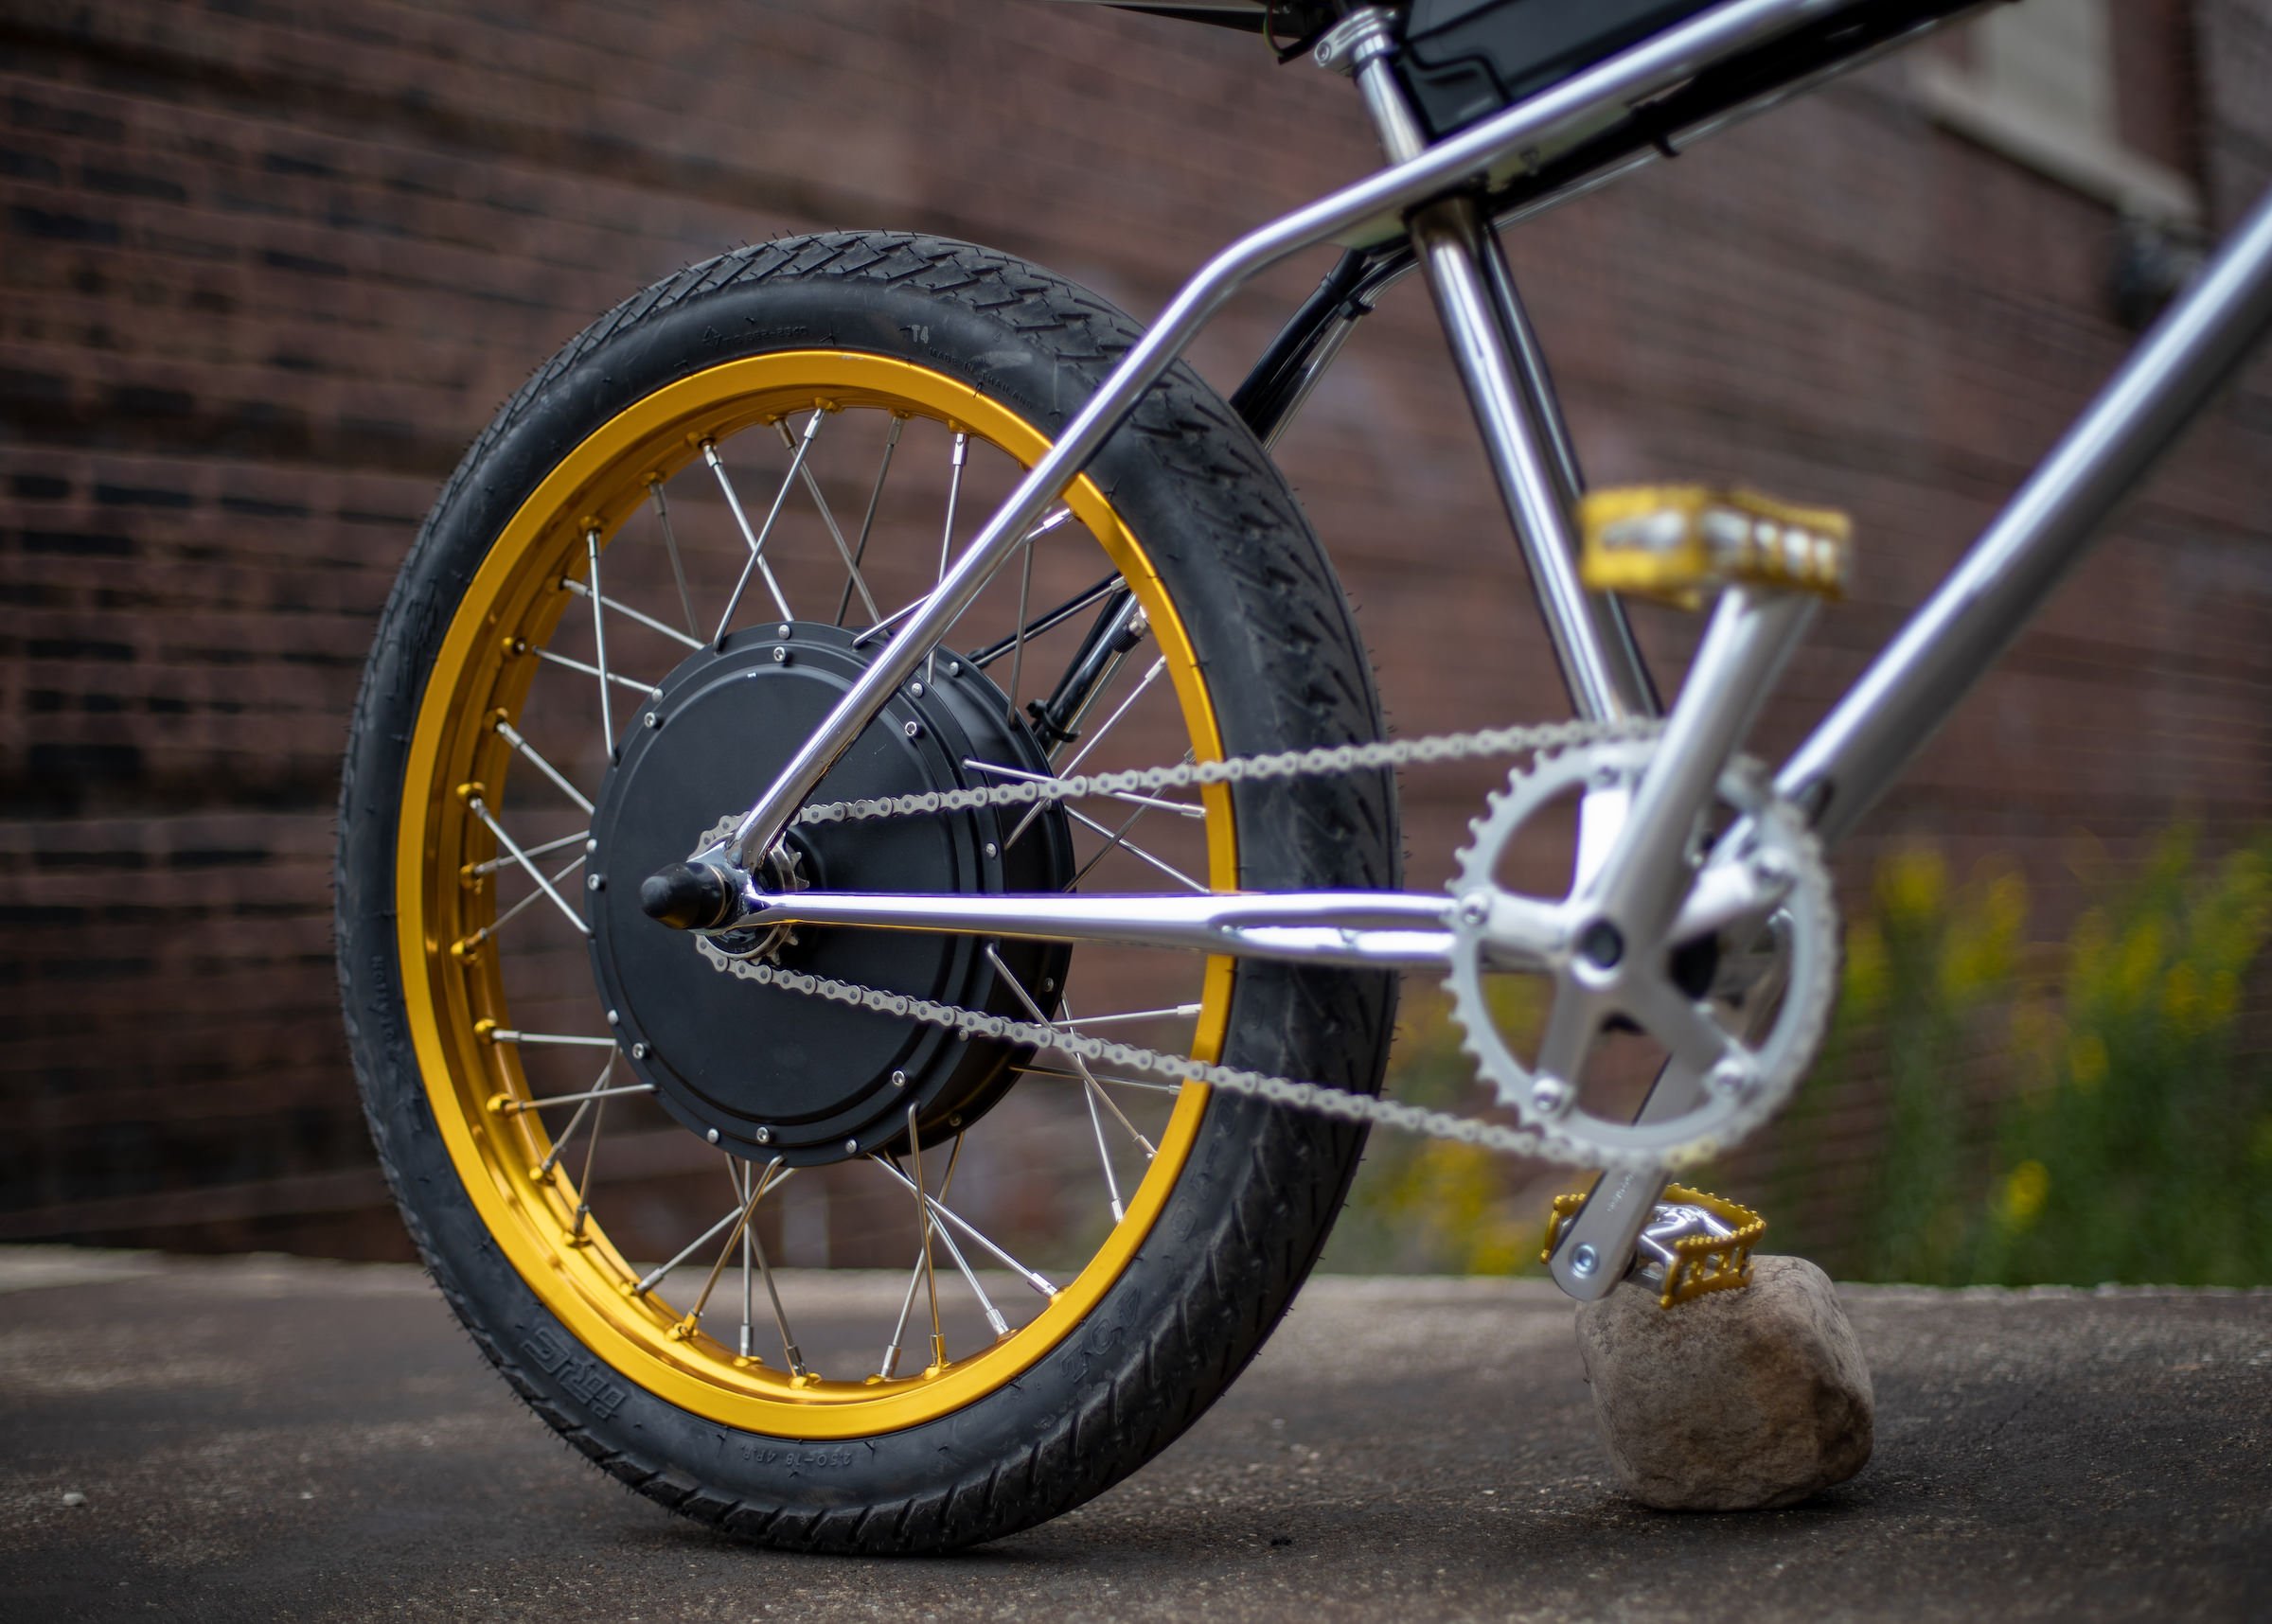 ZOOZ One - An Electric BMX Bike For The 21st Century